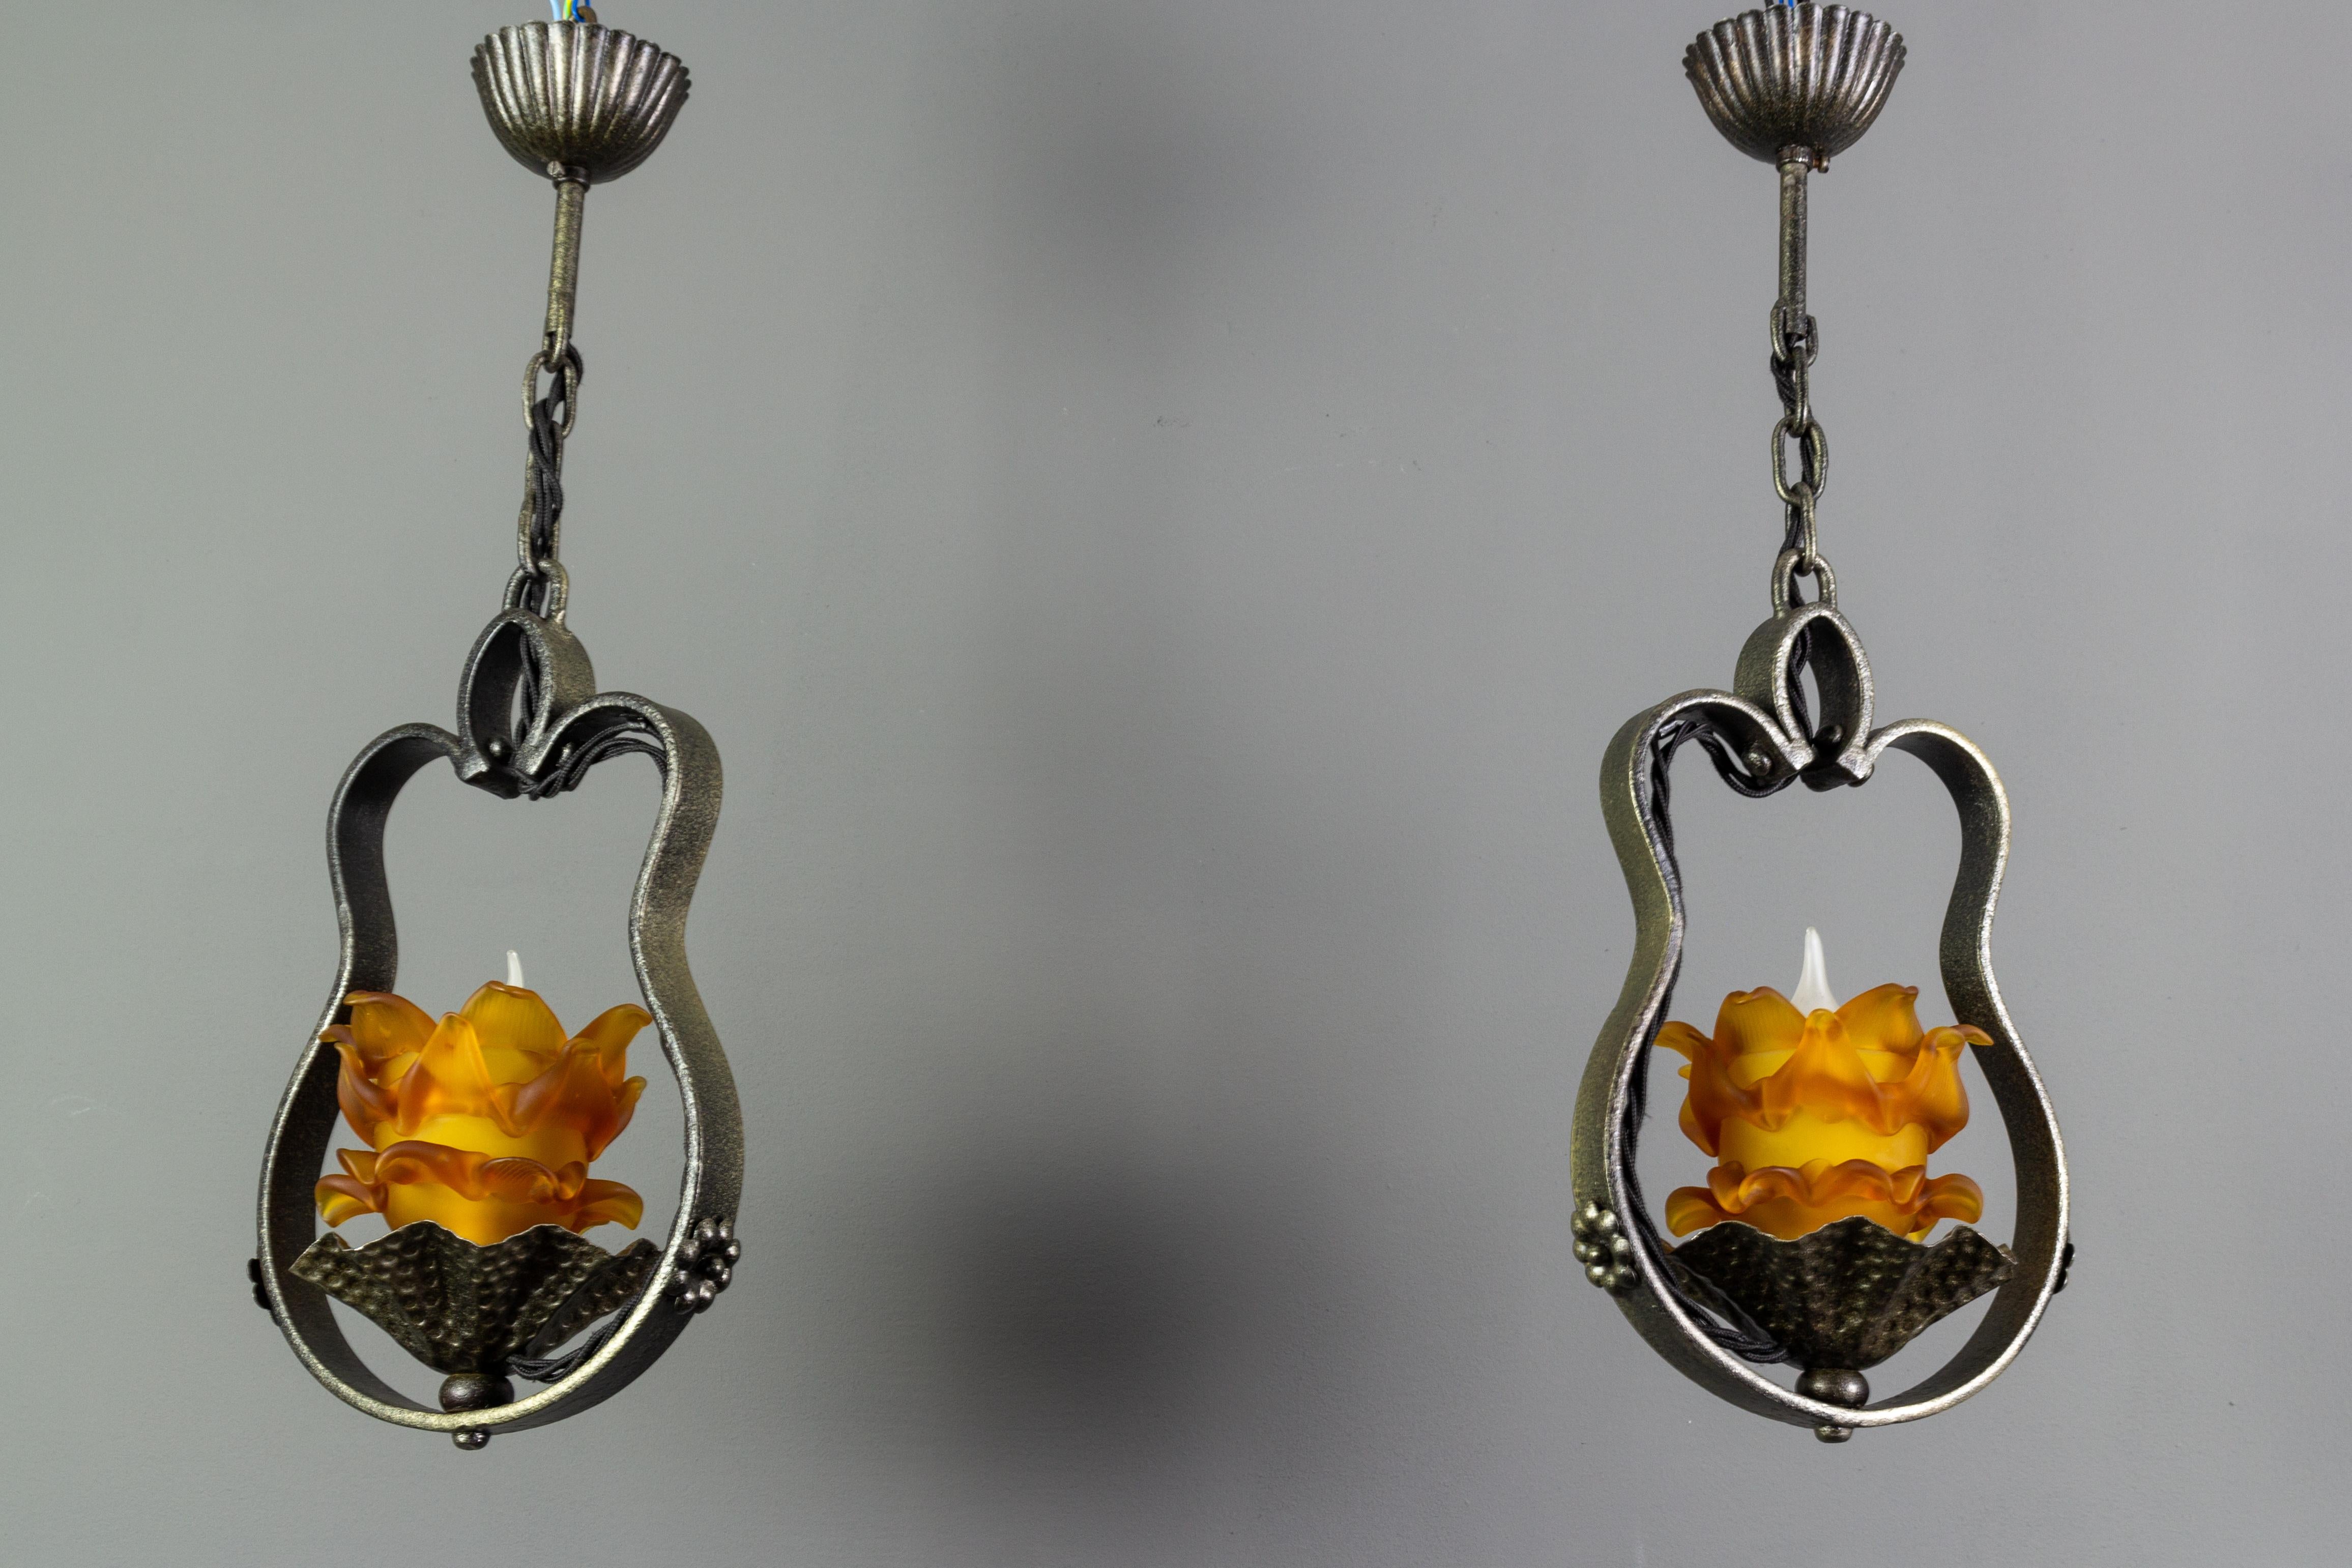 Pair of French Wrought Iron and Orange Glass Flower Shaped Pendant Lights 15